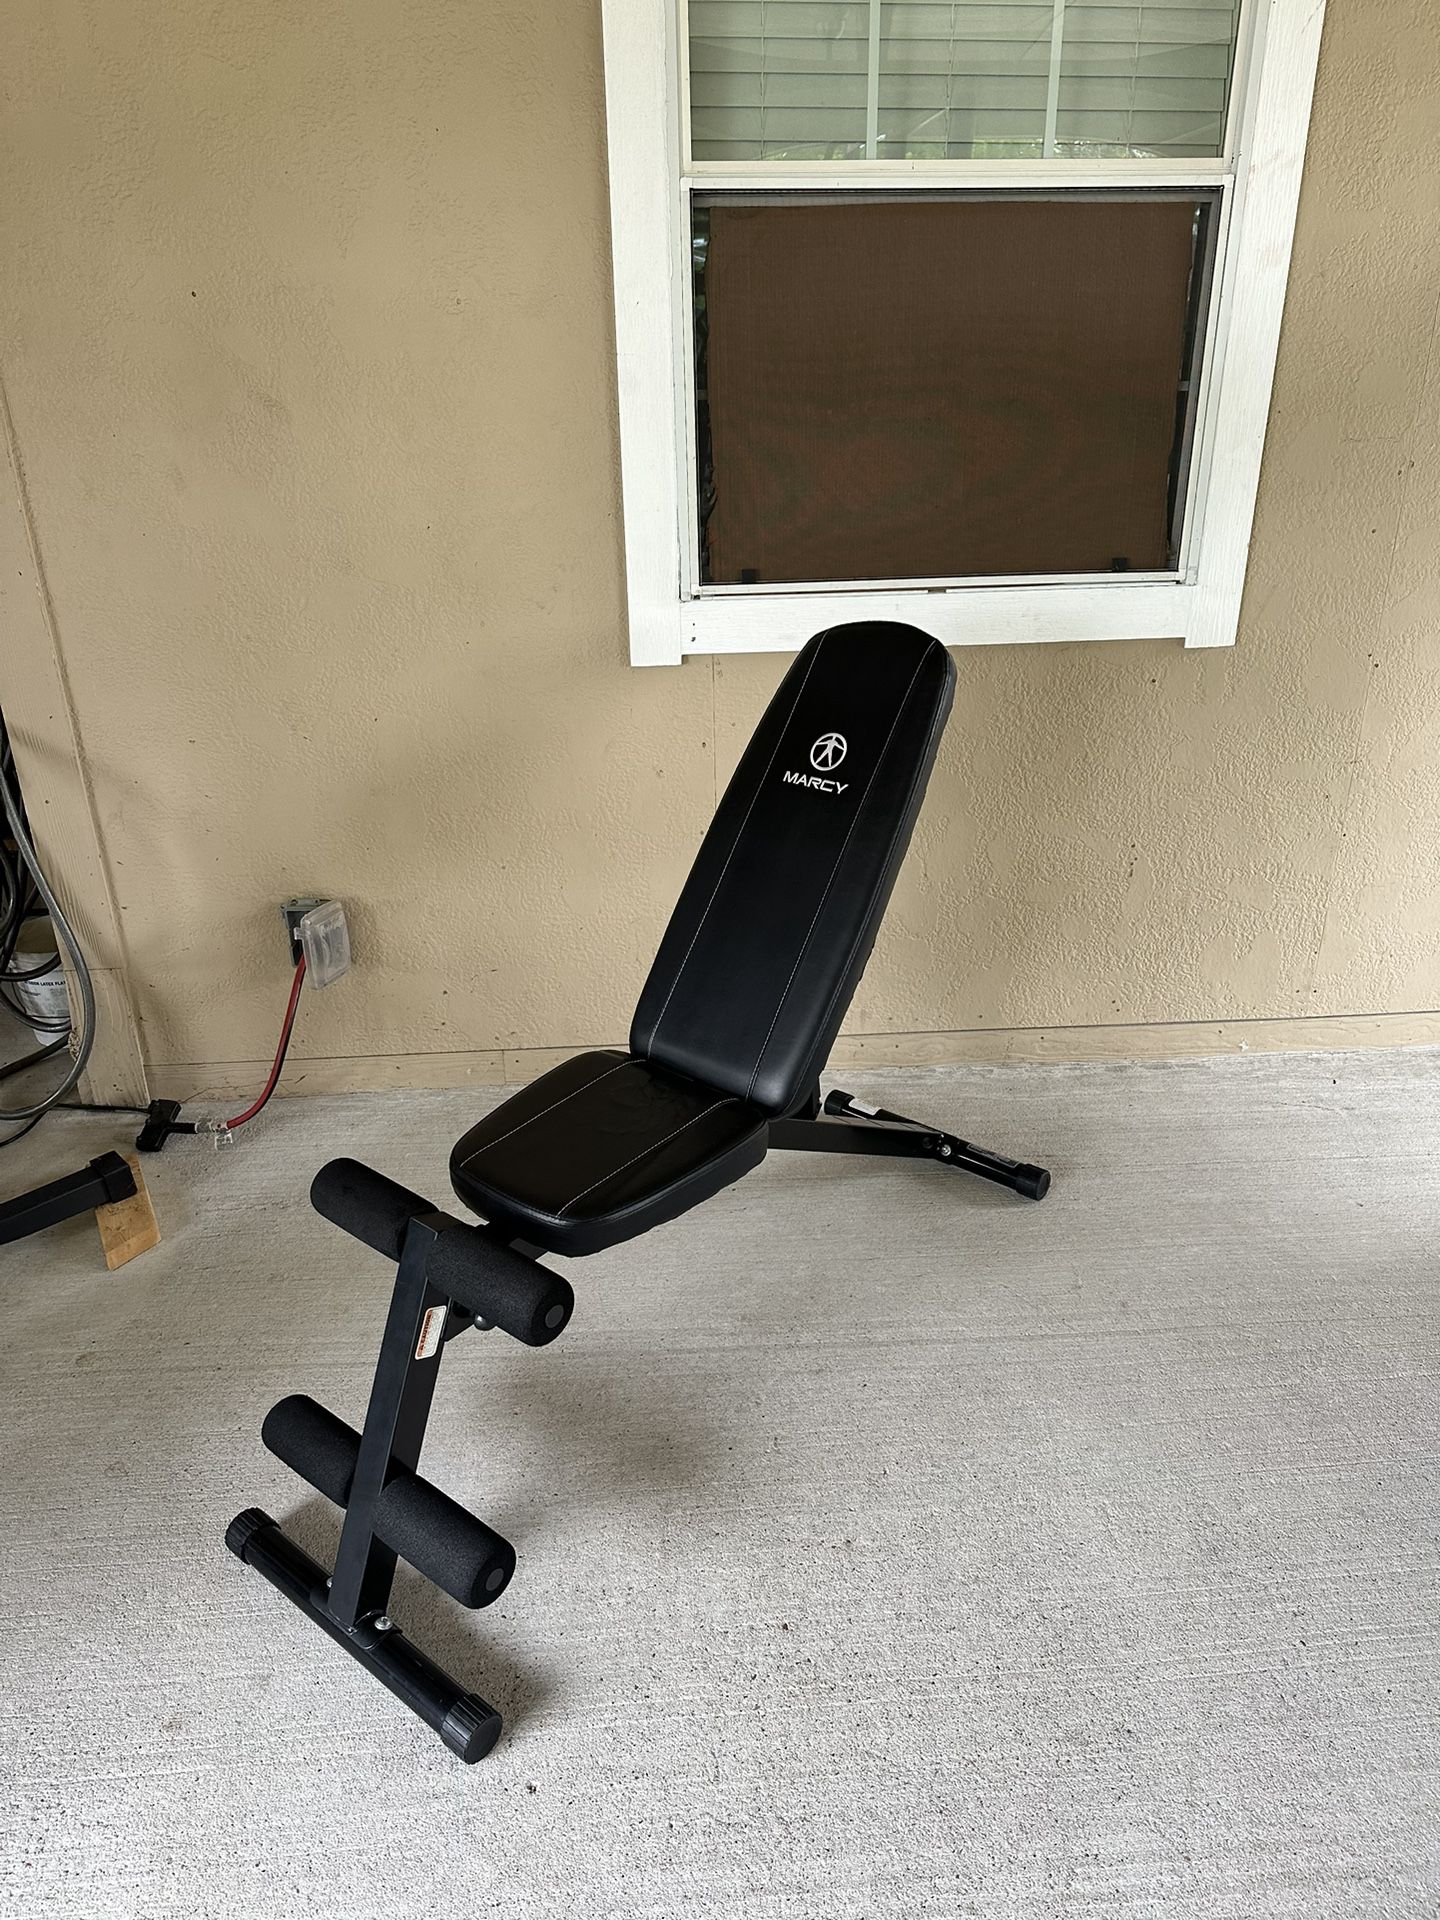 Marcy Multi-Utility Bench $90